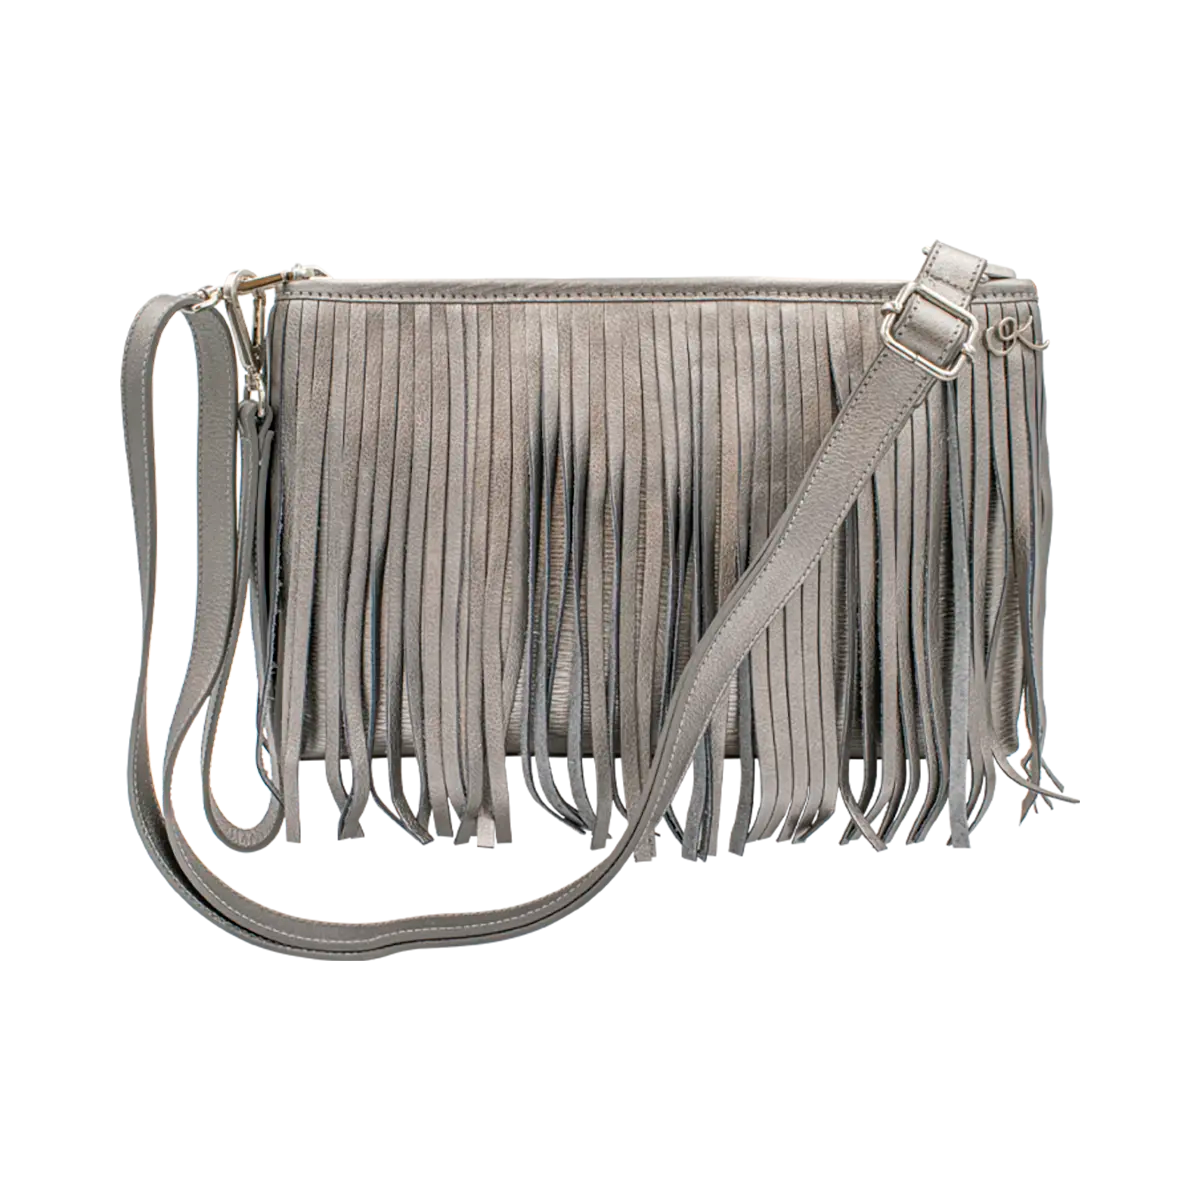 siver small black leather crossbody bag with fringe. Fashion accessory for women in San Diego, CA.